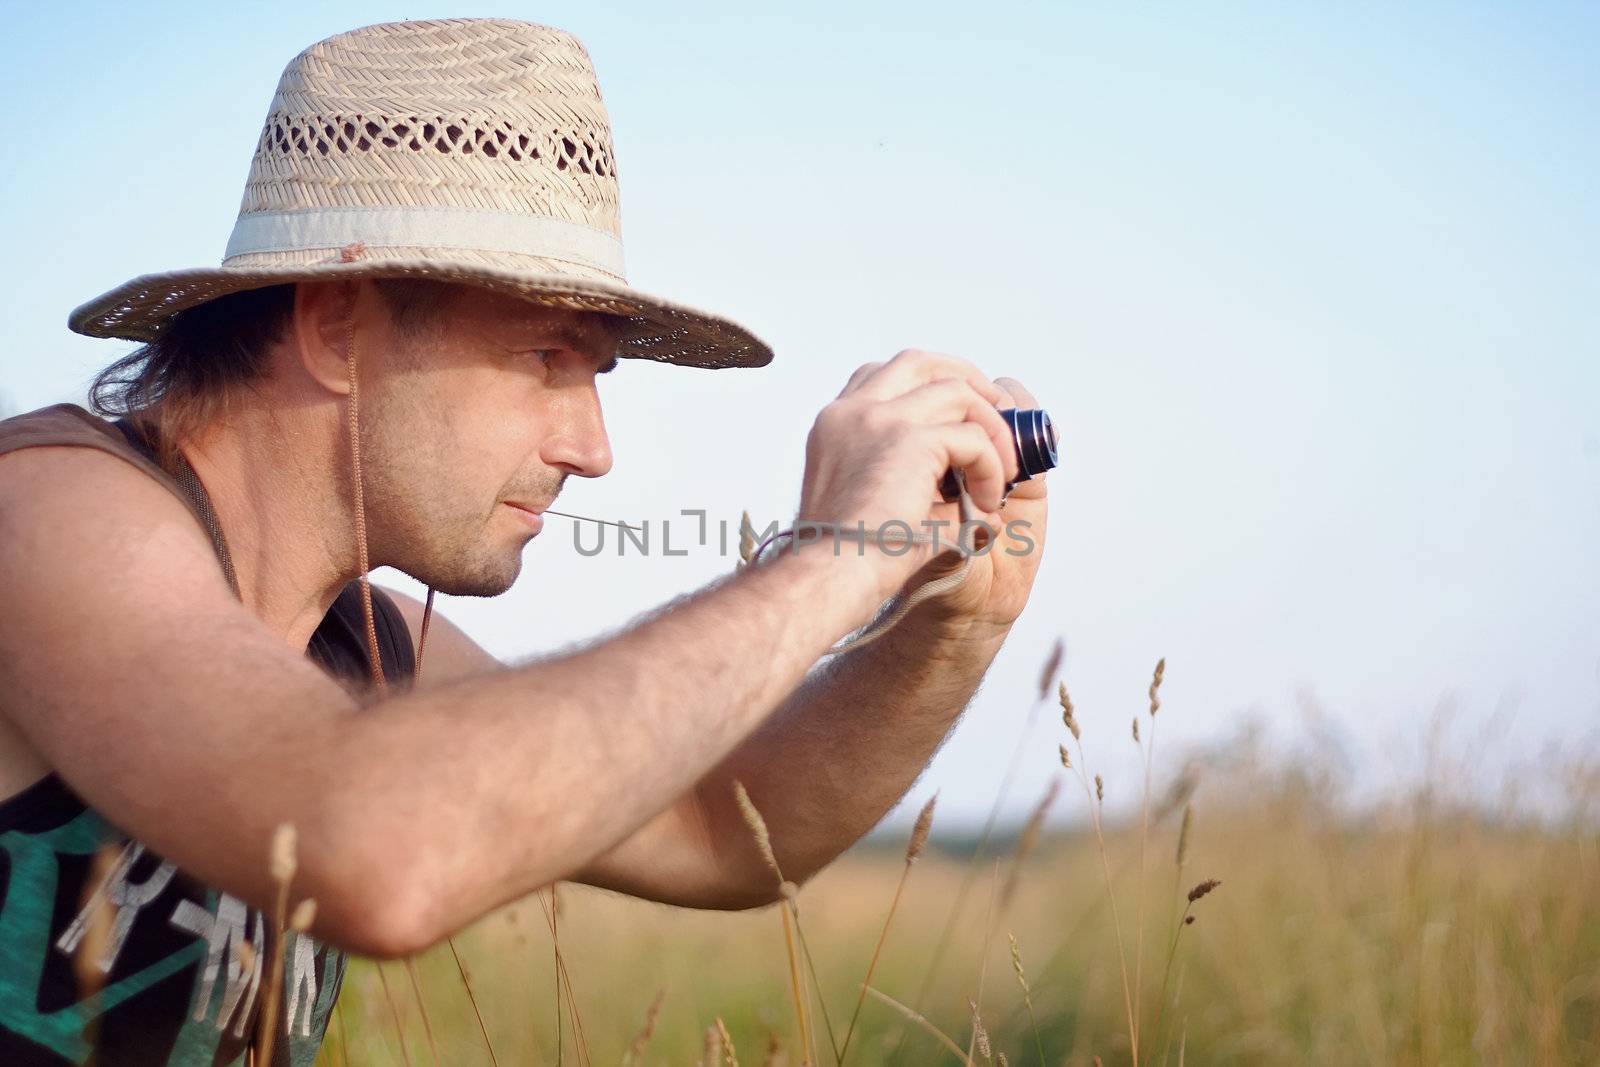 The man in a straw hat with the camera has a rest outdoors